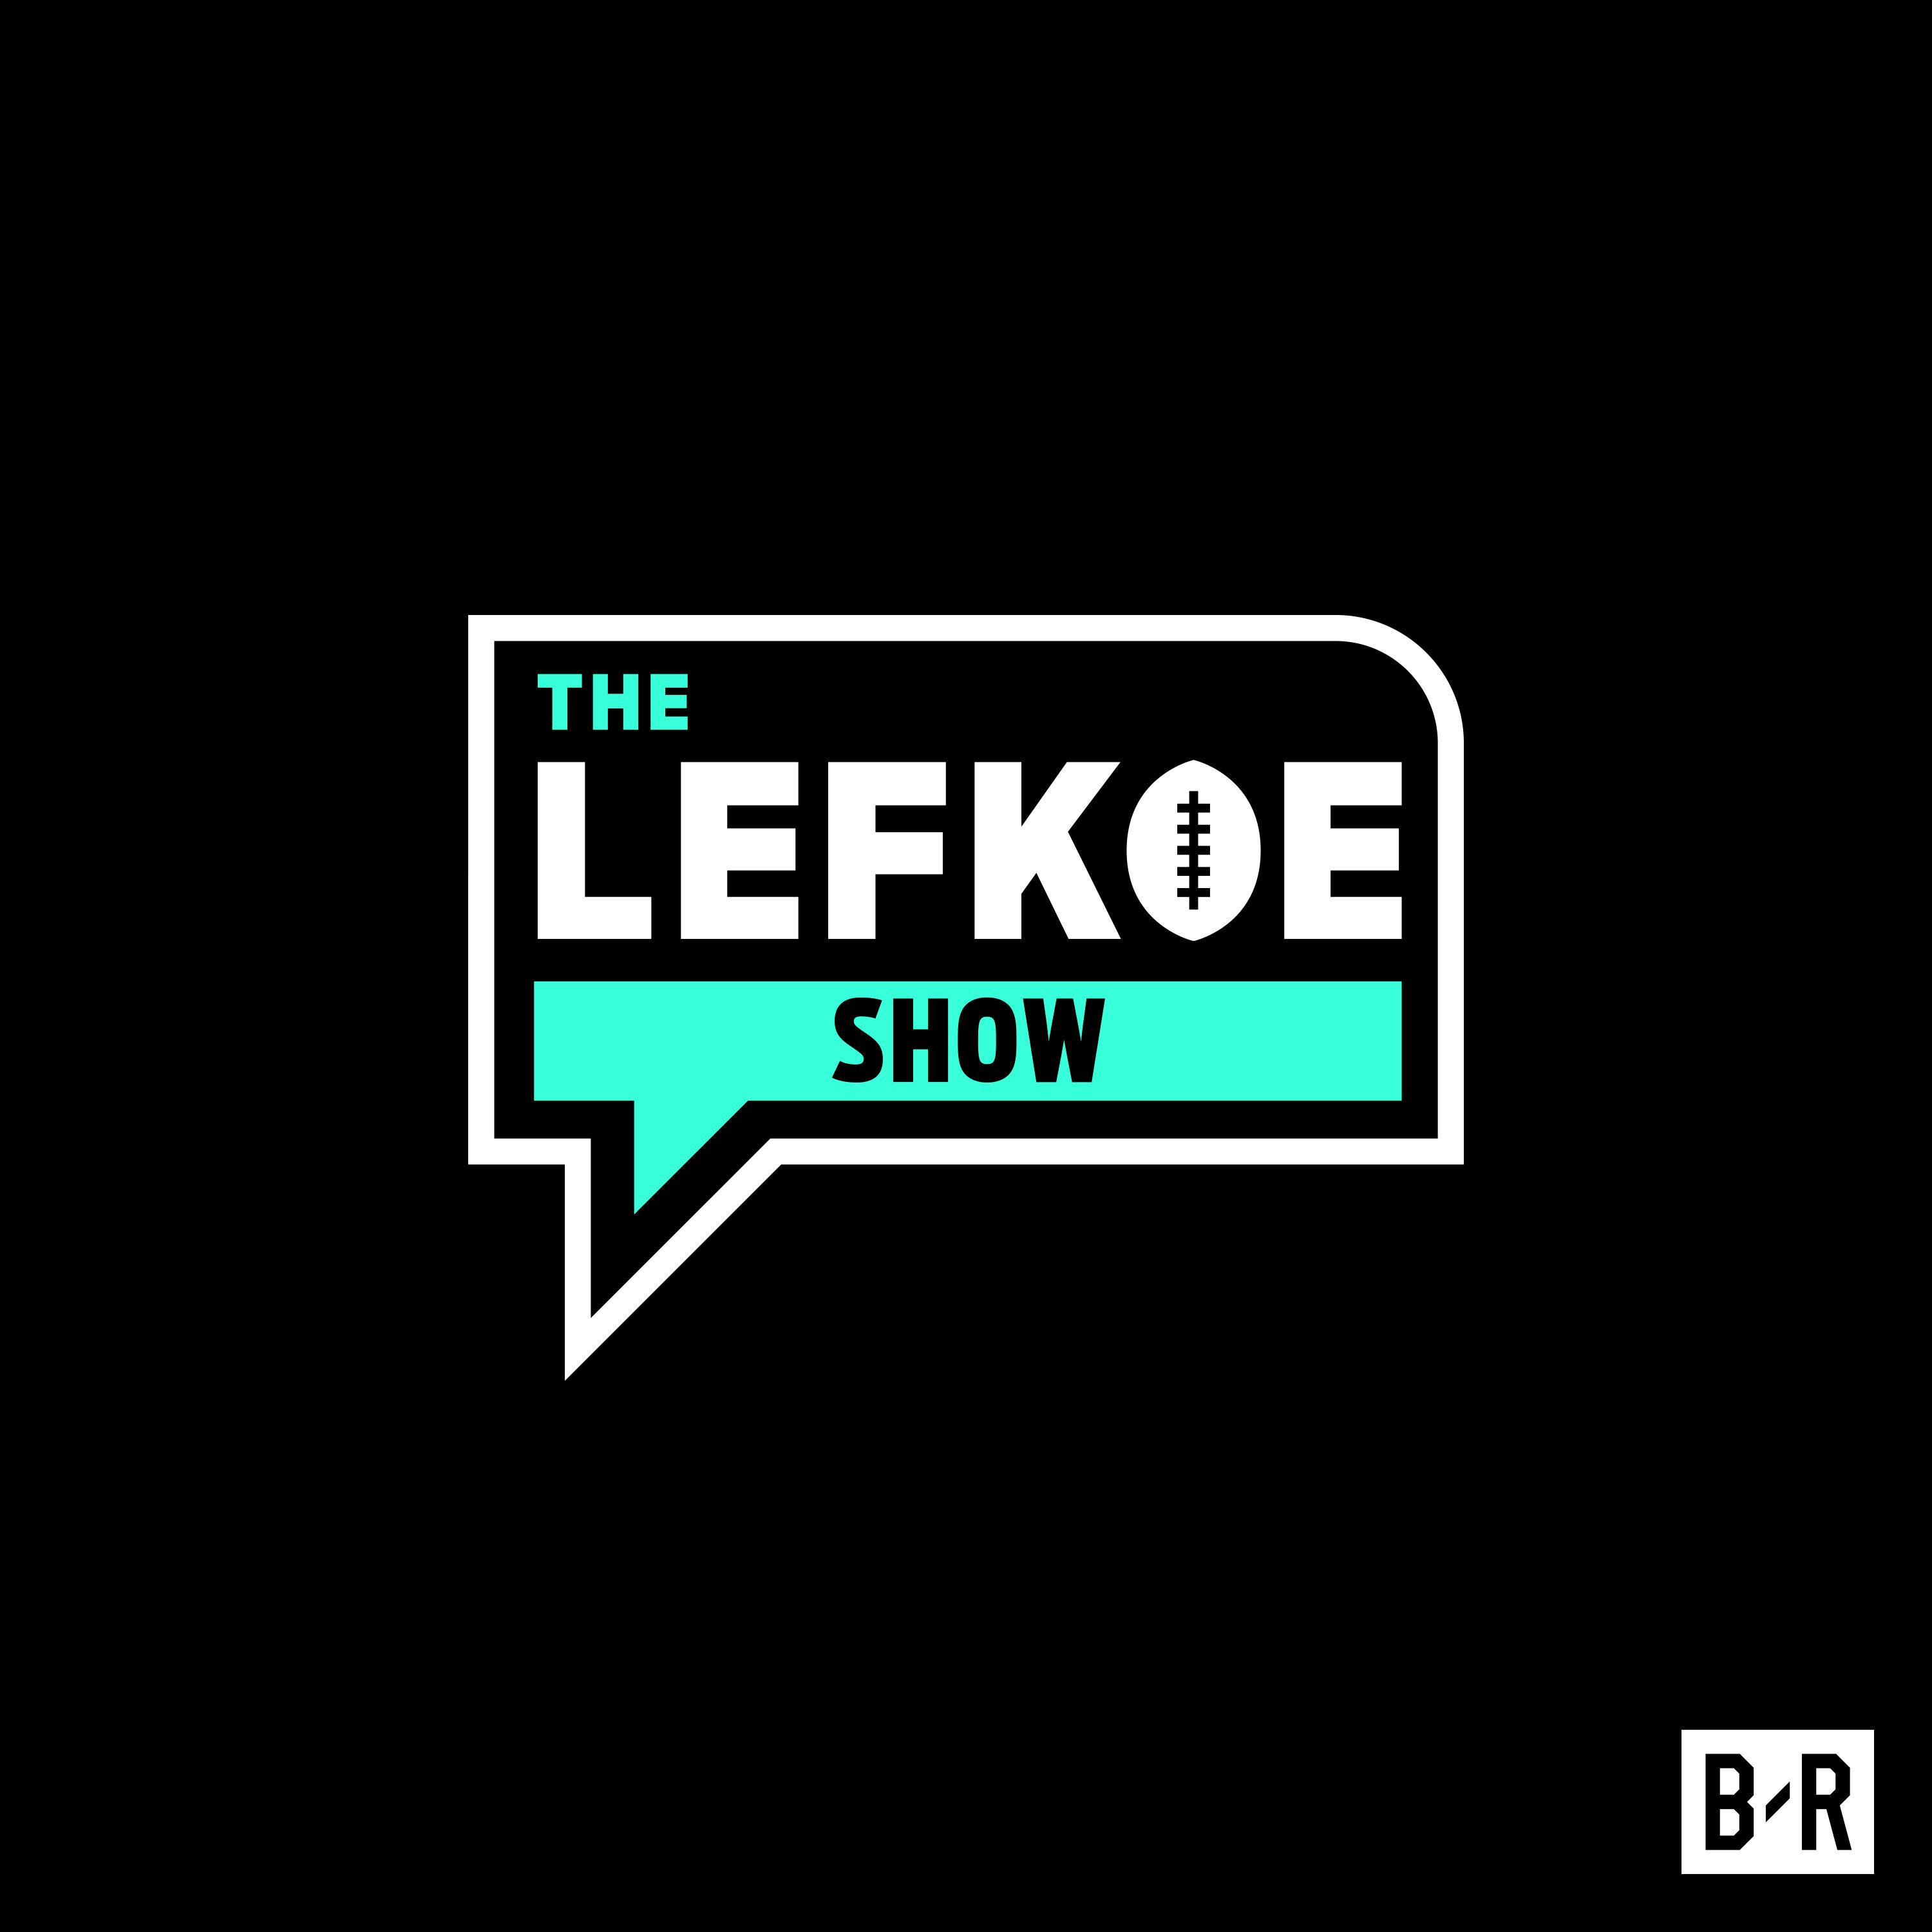 Austin Ekeler Might Be The Biggest Gamer In The NFL | The Lefkoe Show